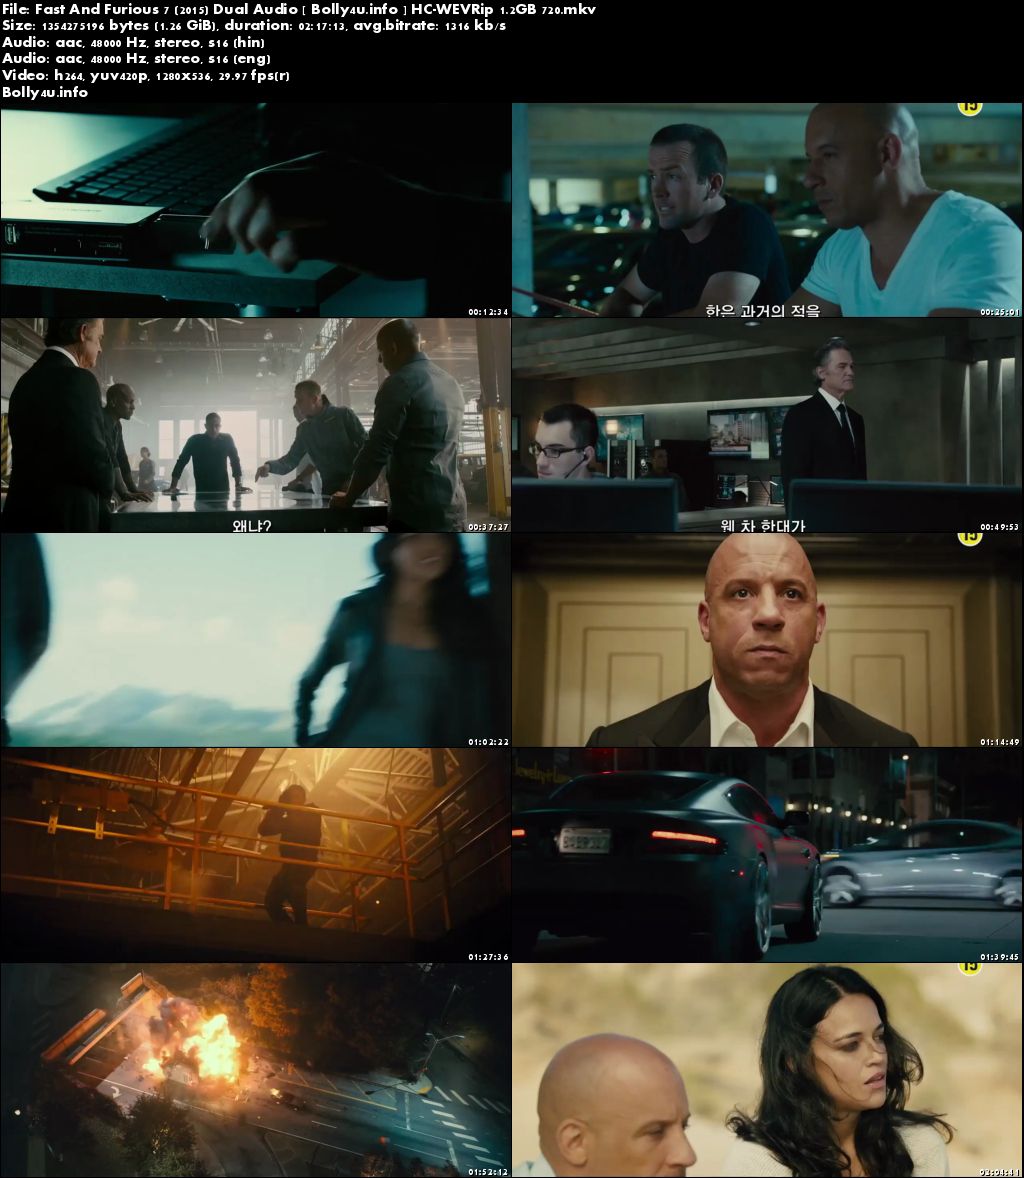 fast furious 2 torrent download